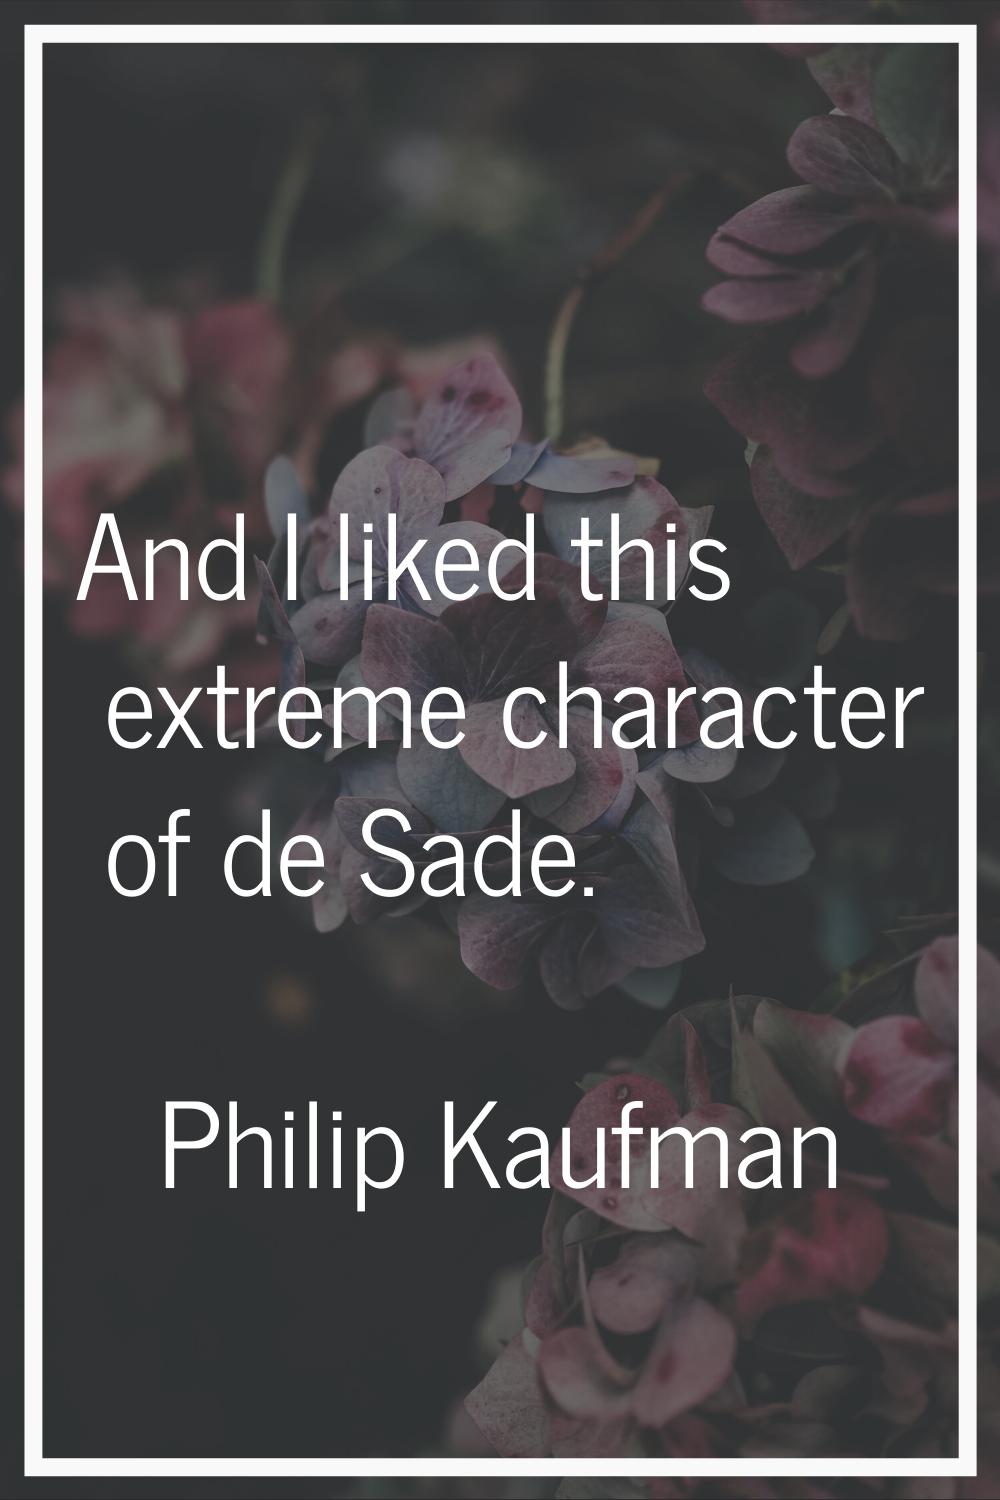 And I liked this extreme character of de Sade.